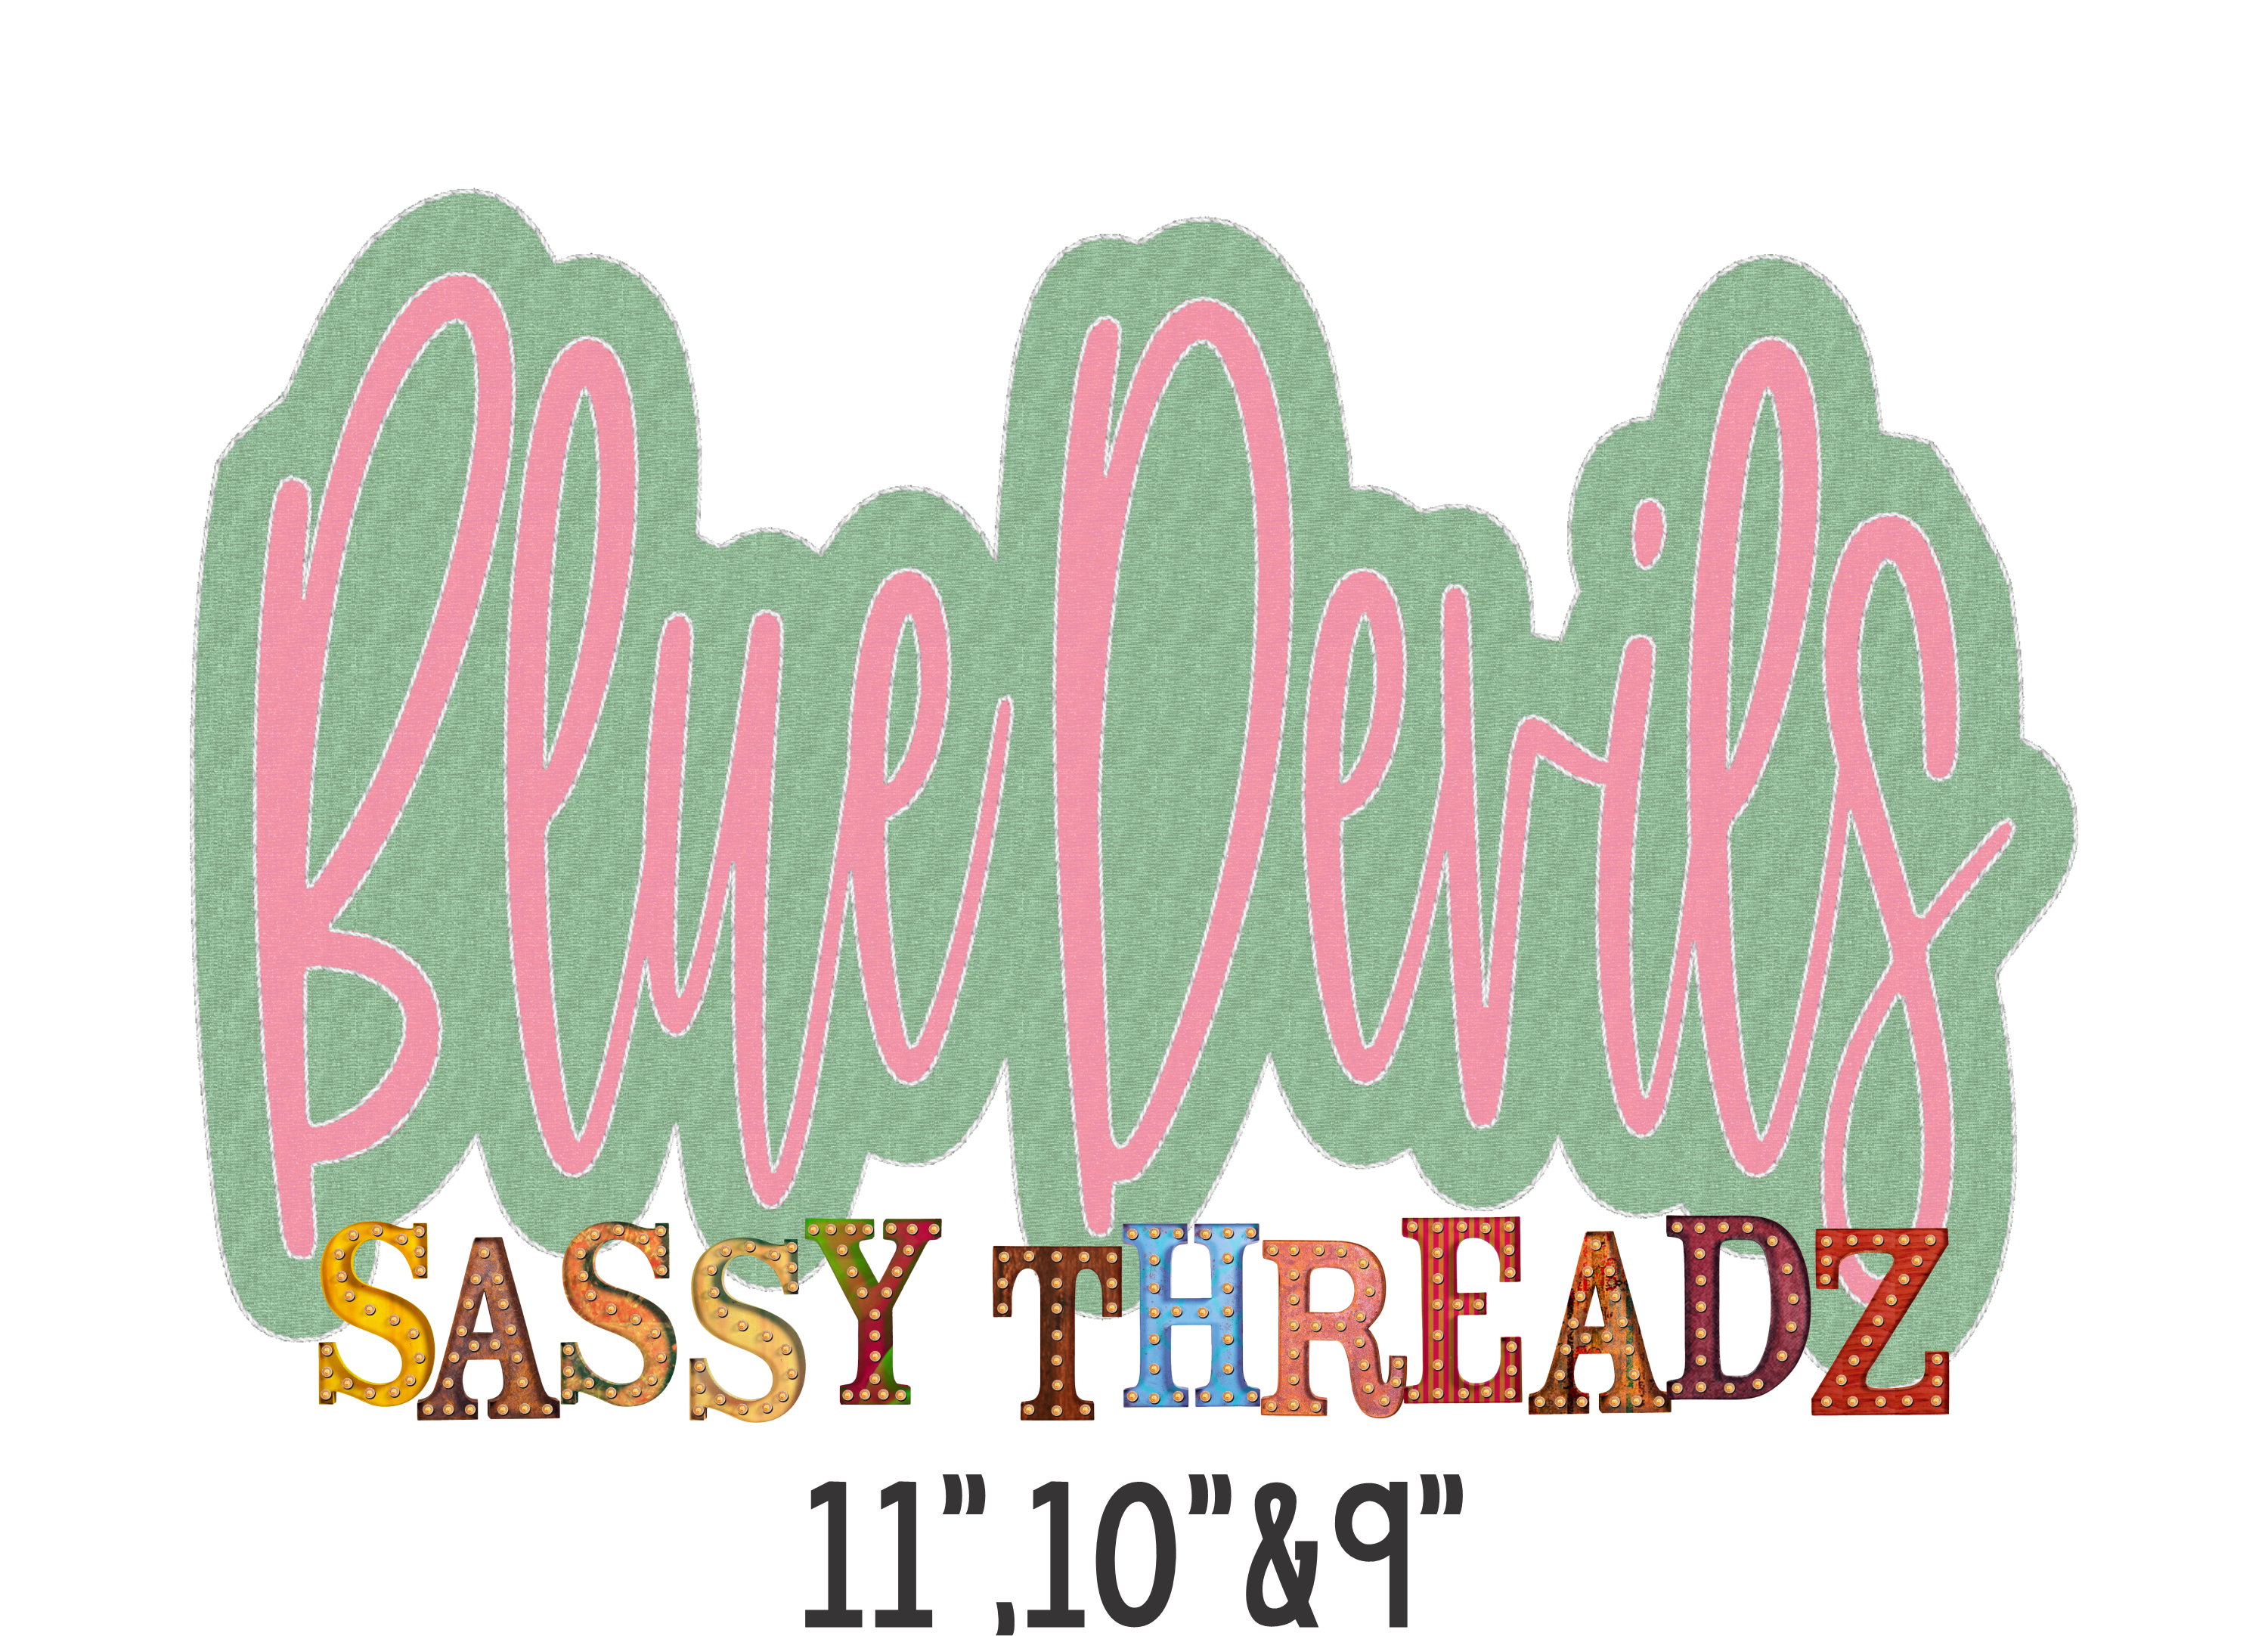 Blue Devils Double Stacked Script Embroidery Download